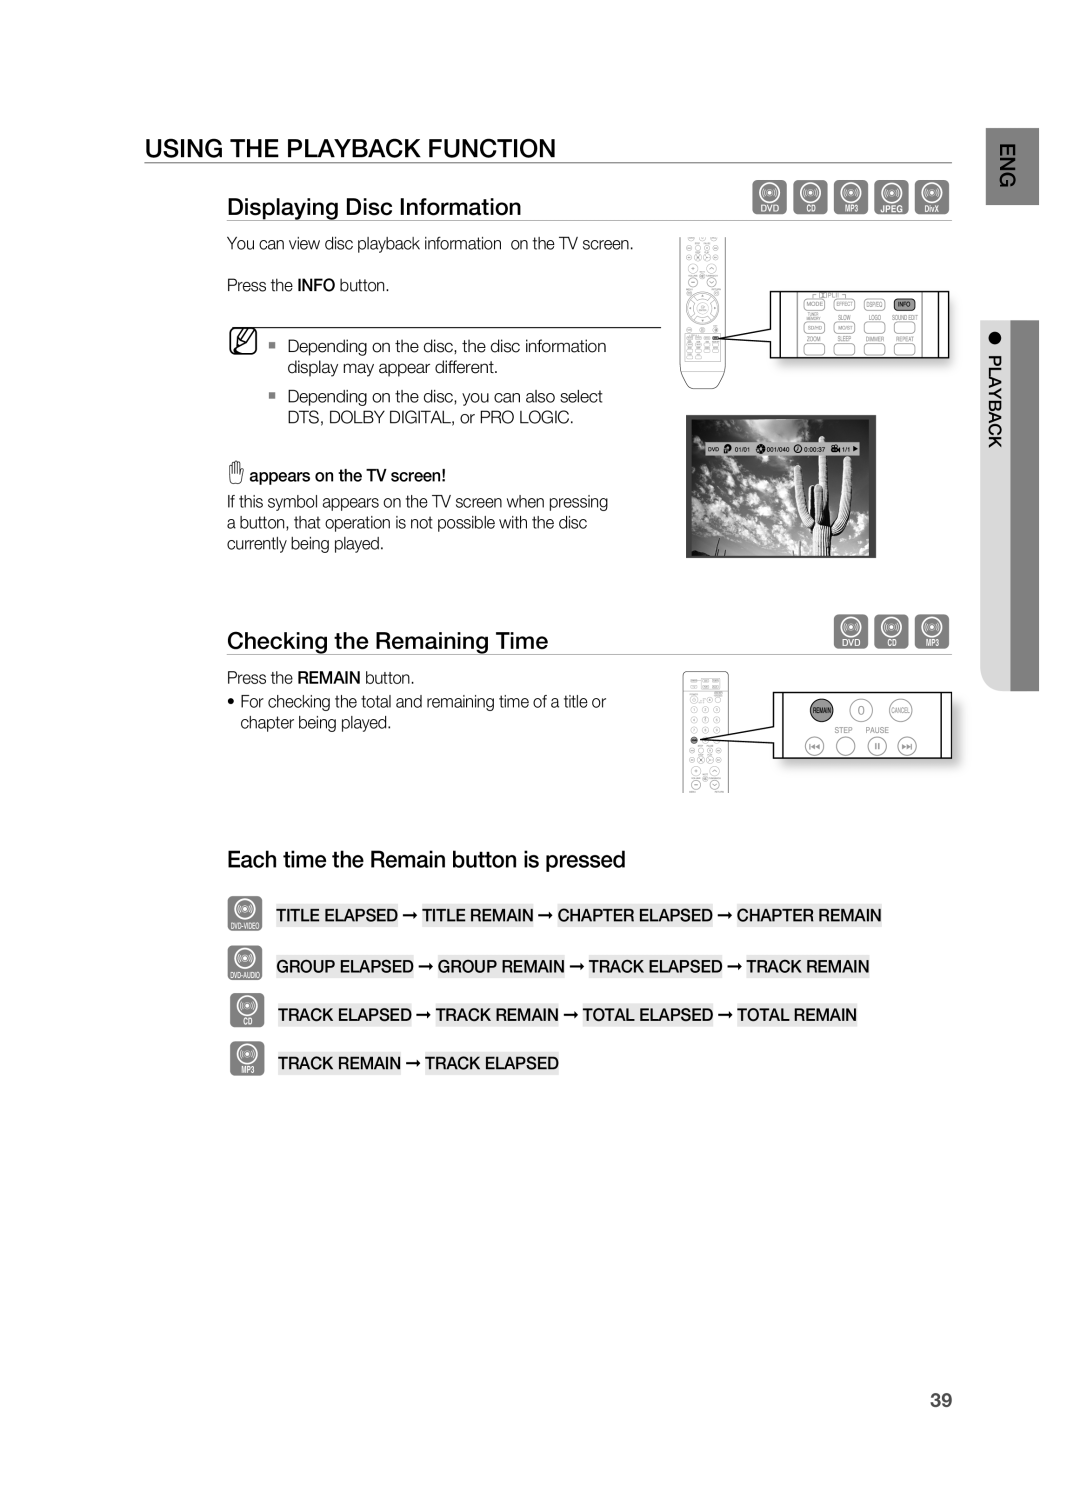 Samsung HT-TWZ415 user manual dBAGD, USINg THE PLAYBACK FUNCTION 